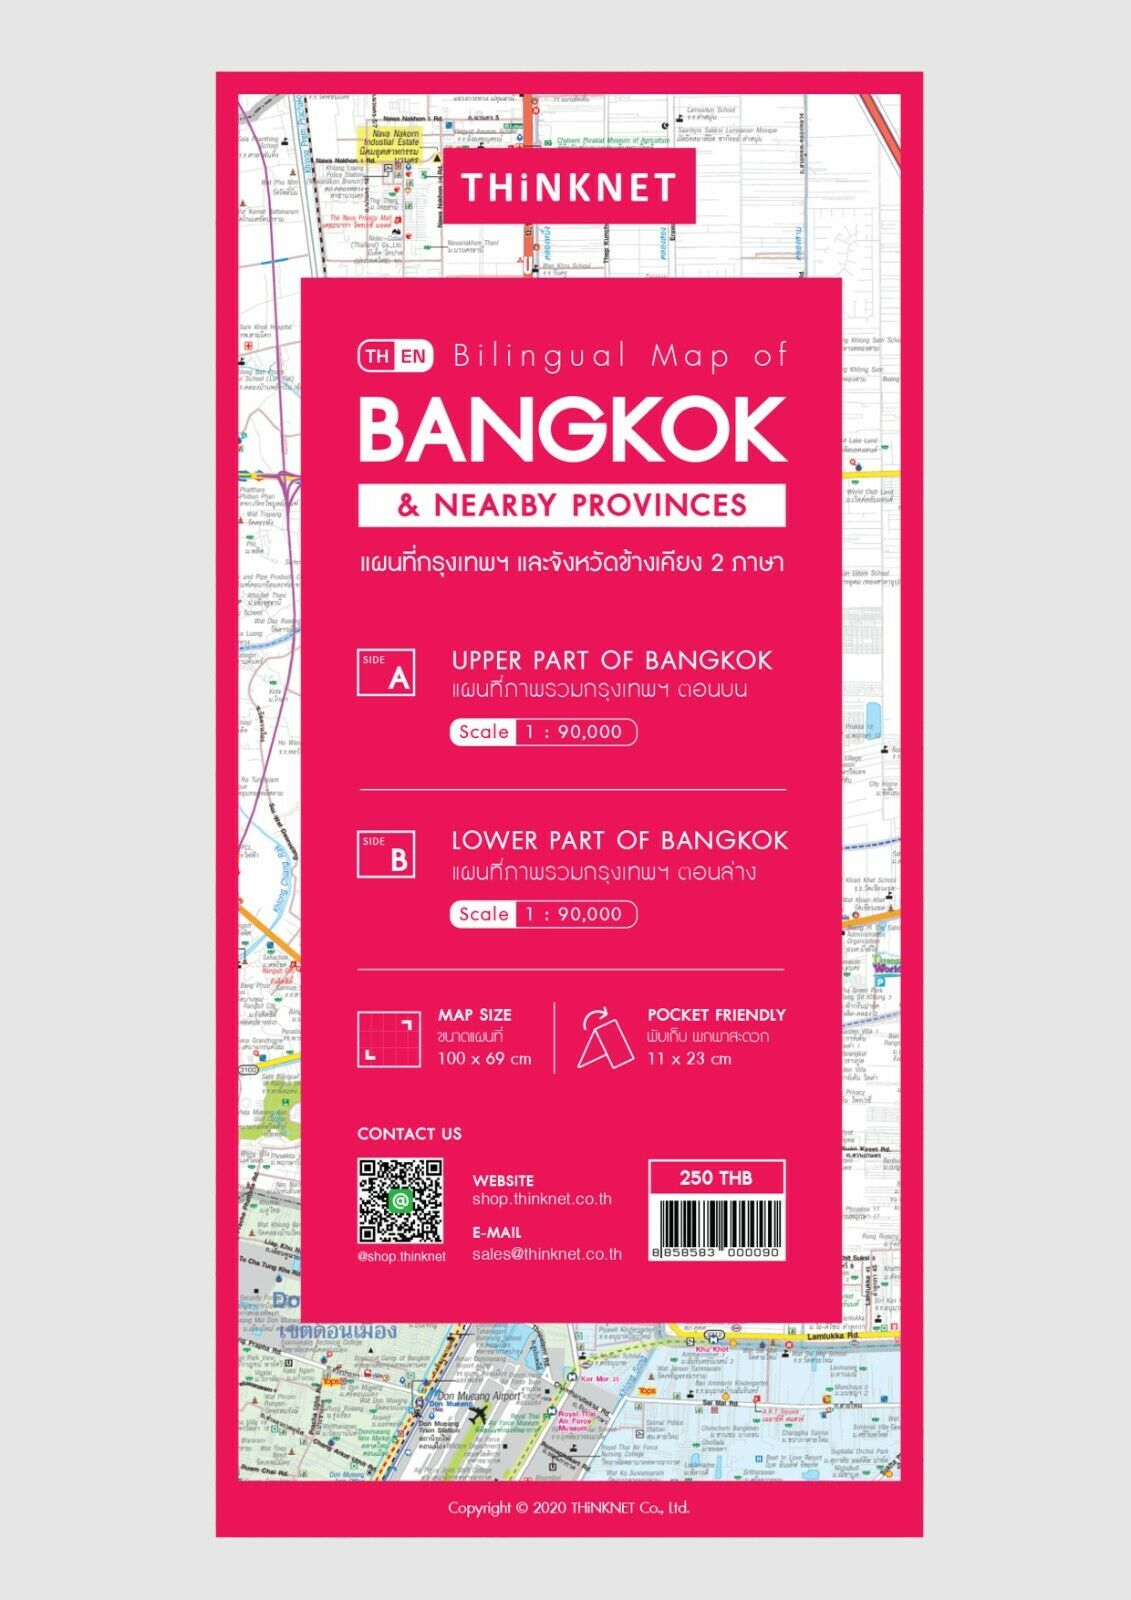 Bangkok & Nearby Provinces Bilingual Map Thailand Foldable By Thinknet